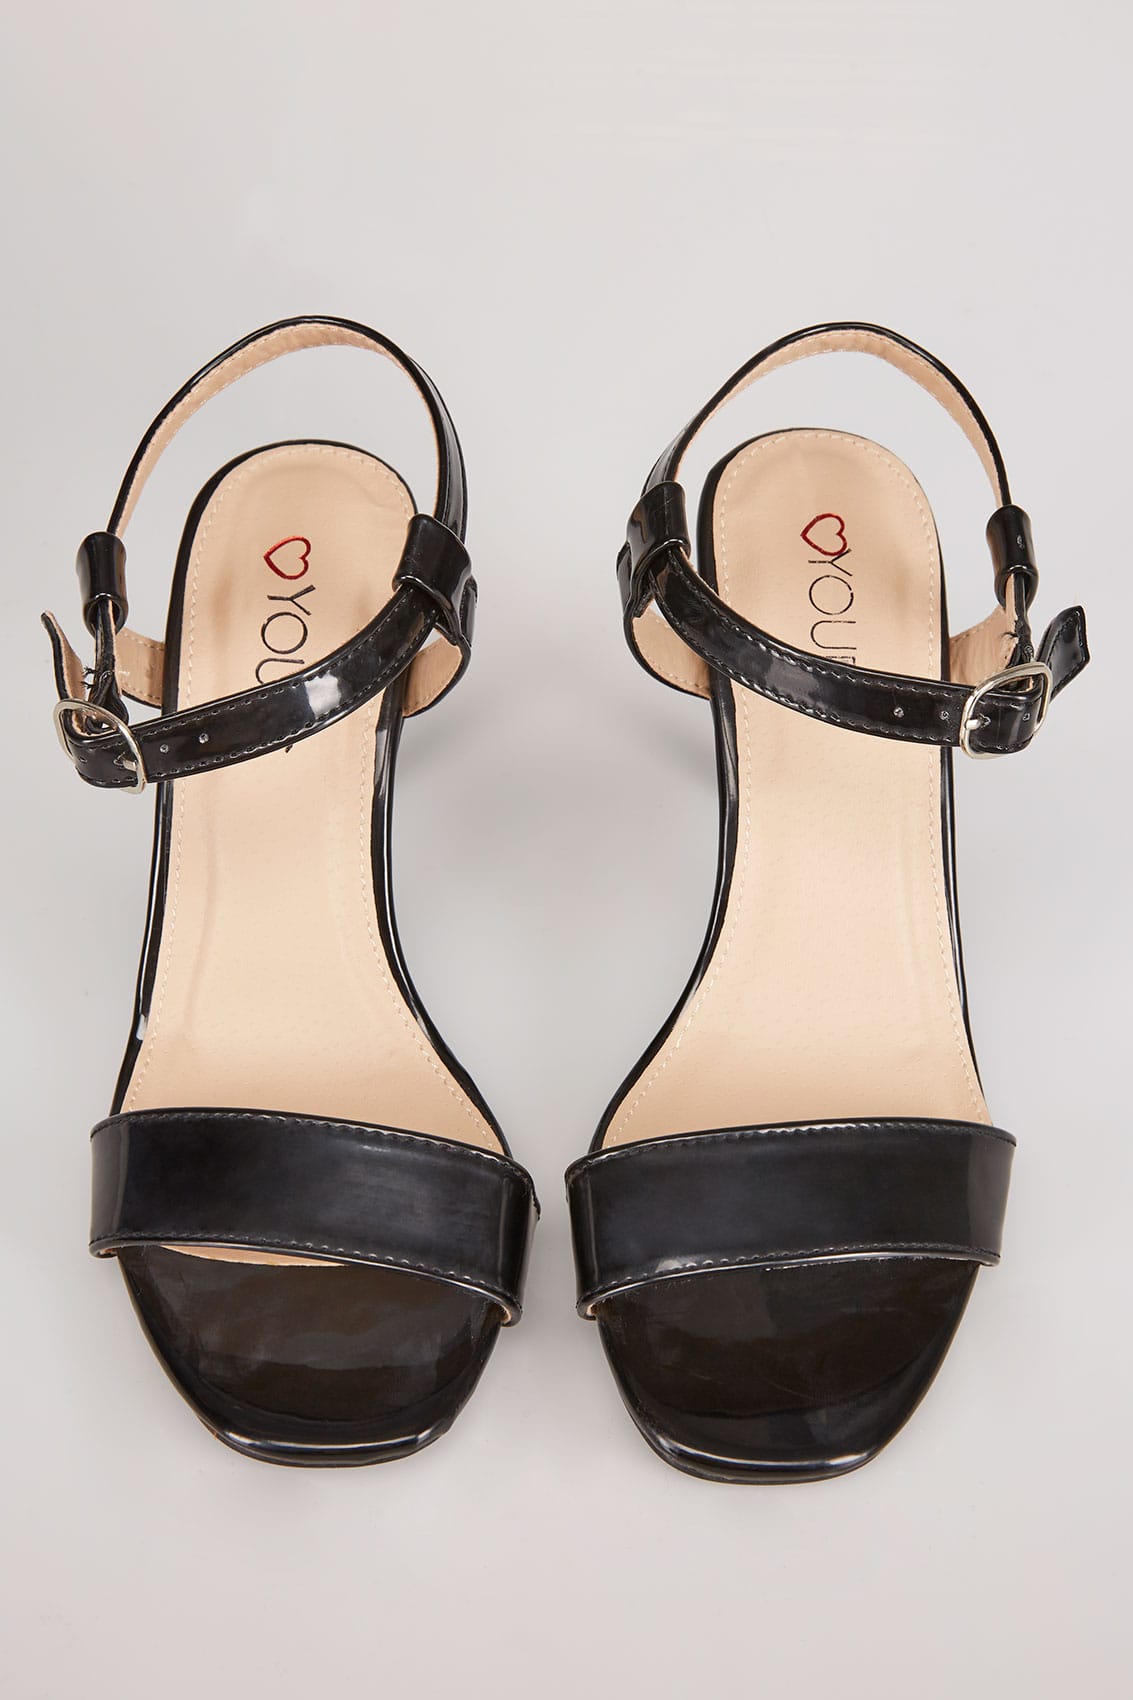 Black Patent Square Toe Heeled Sandals With Ankle Strap In EEE Fit 4EEE